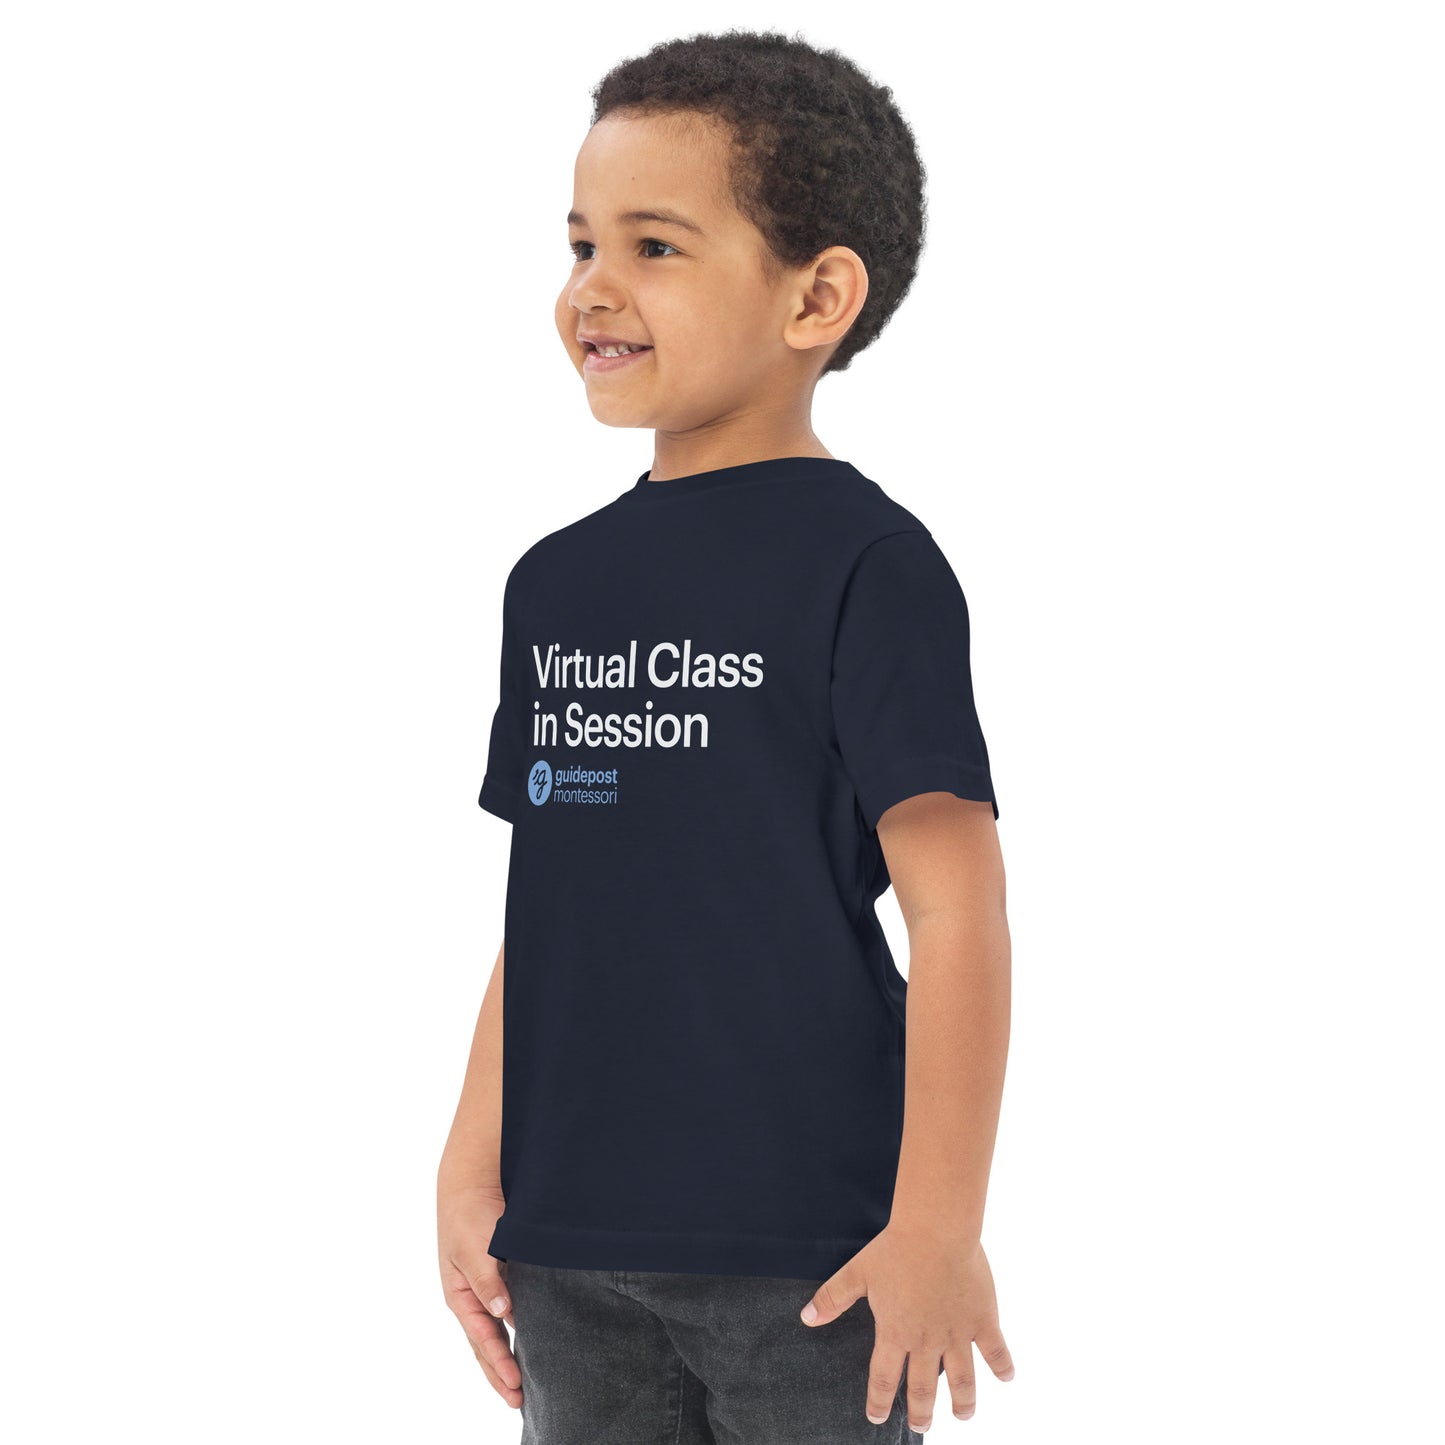 Virtual Class in Session Toddler jersey t-shirt